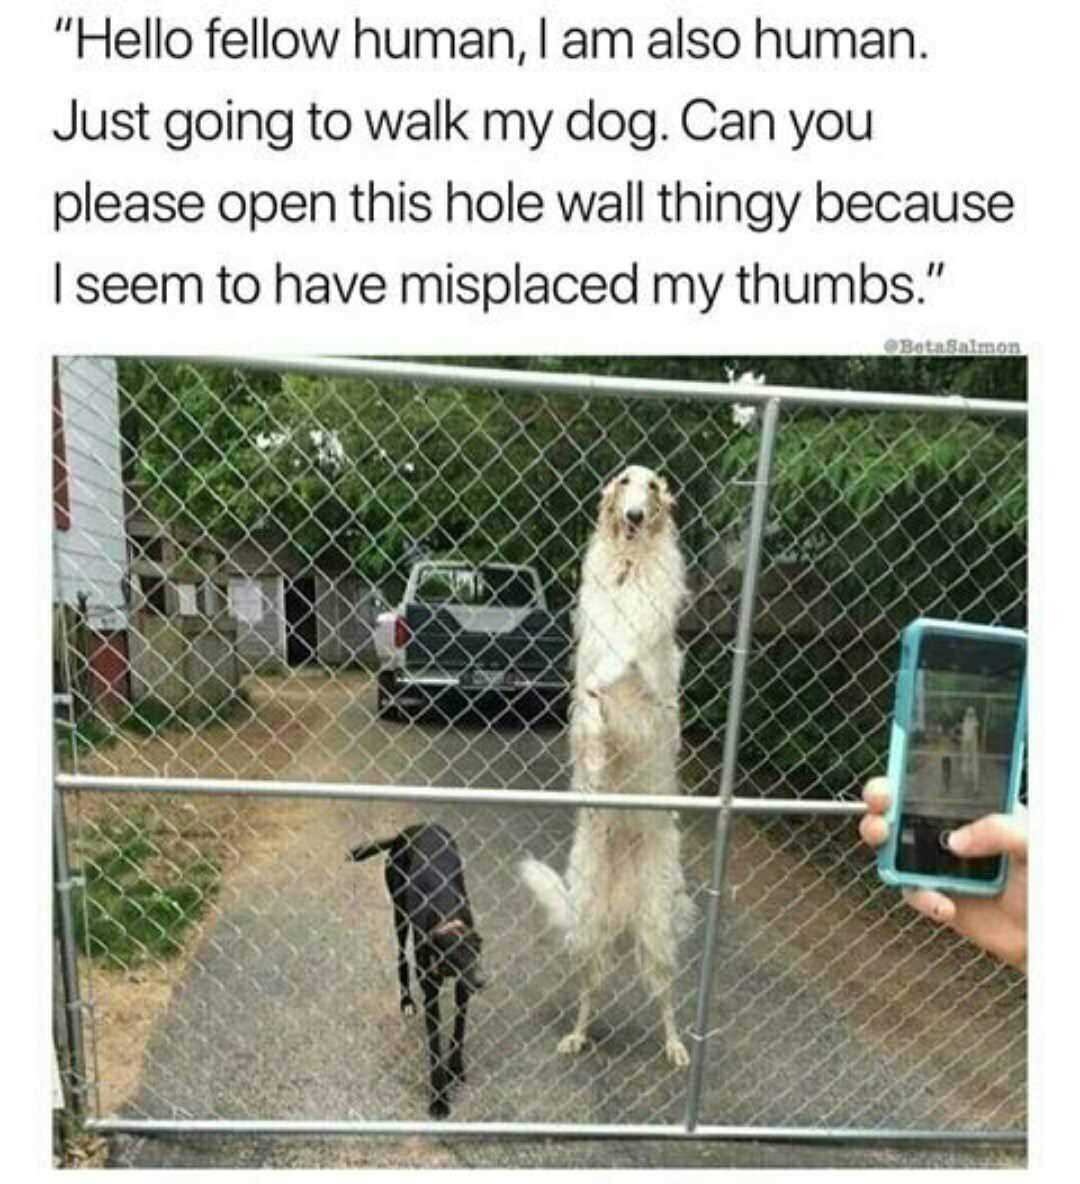 memes - borzoi long boy - "Hello fellow human, I am also human. Just going to walk my dog. Can you please open this hole wall thingy because I seem to have misplaced my thumbs." Bota Salmon